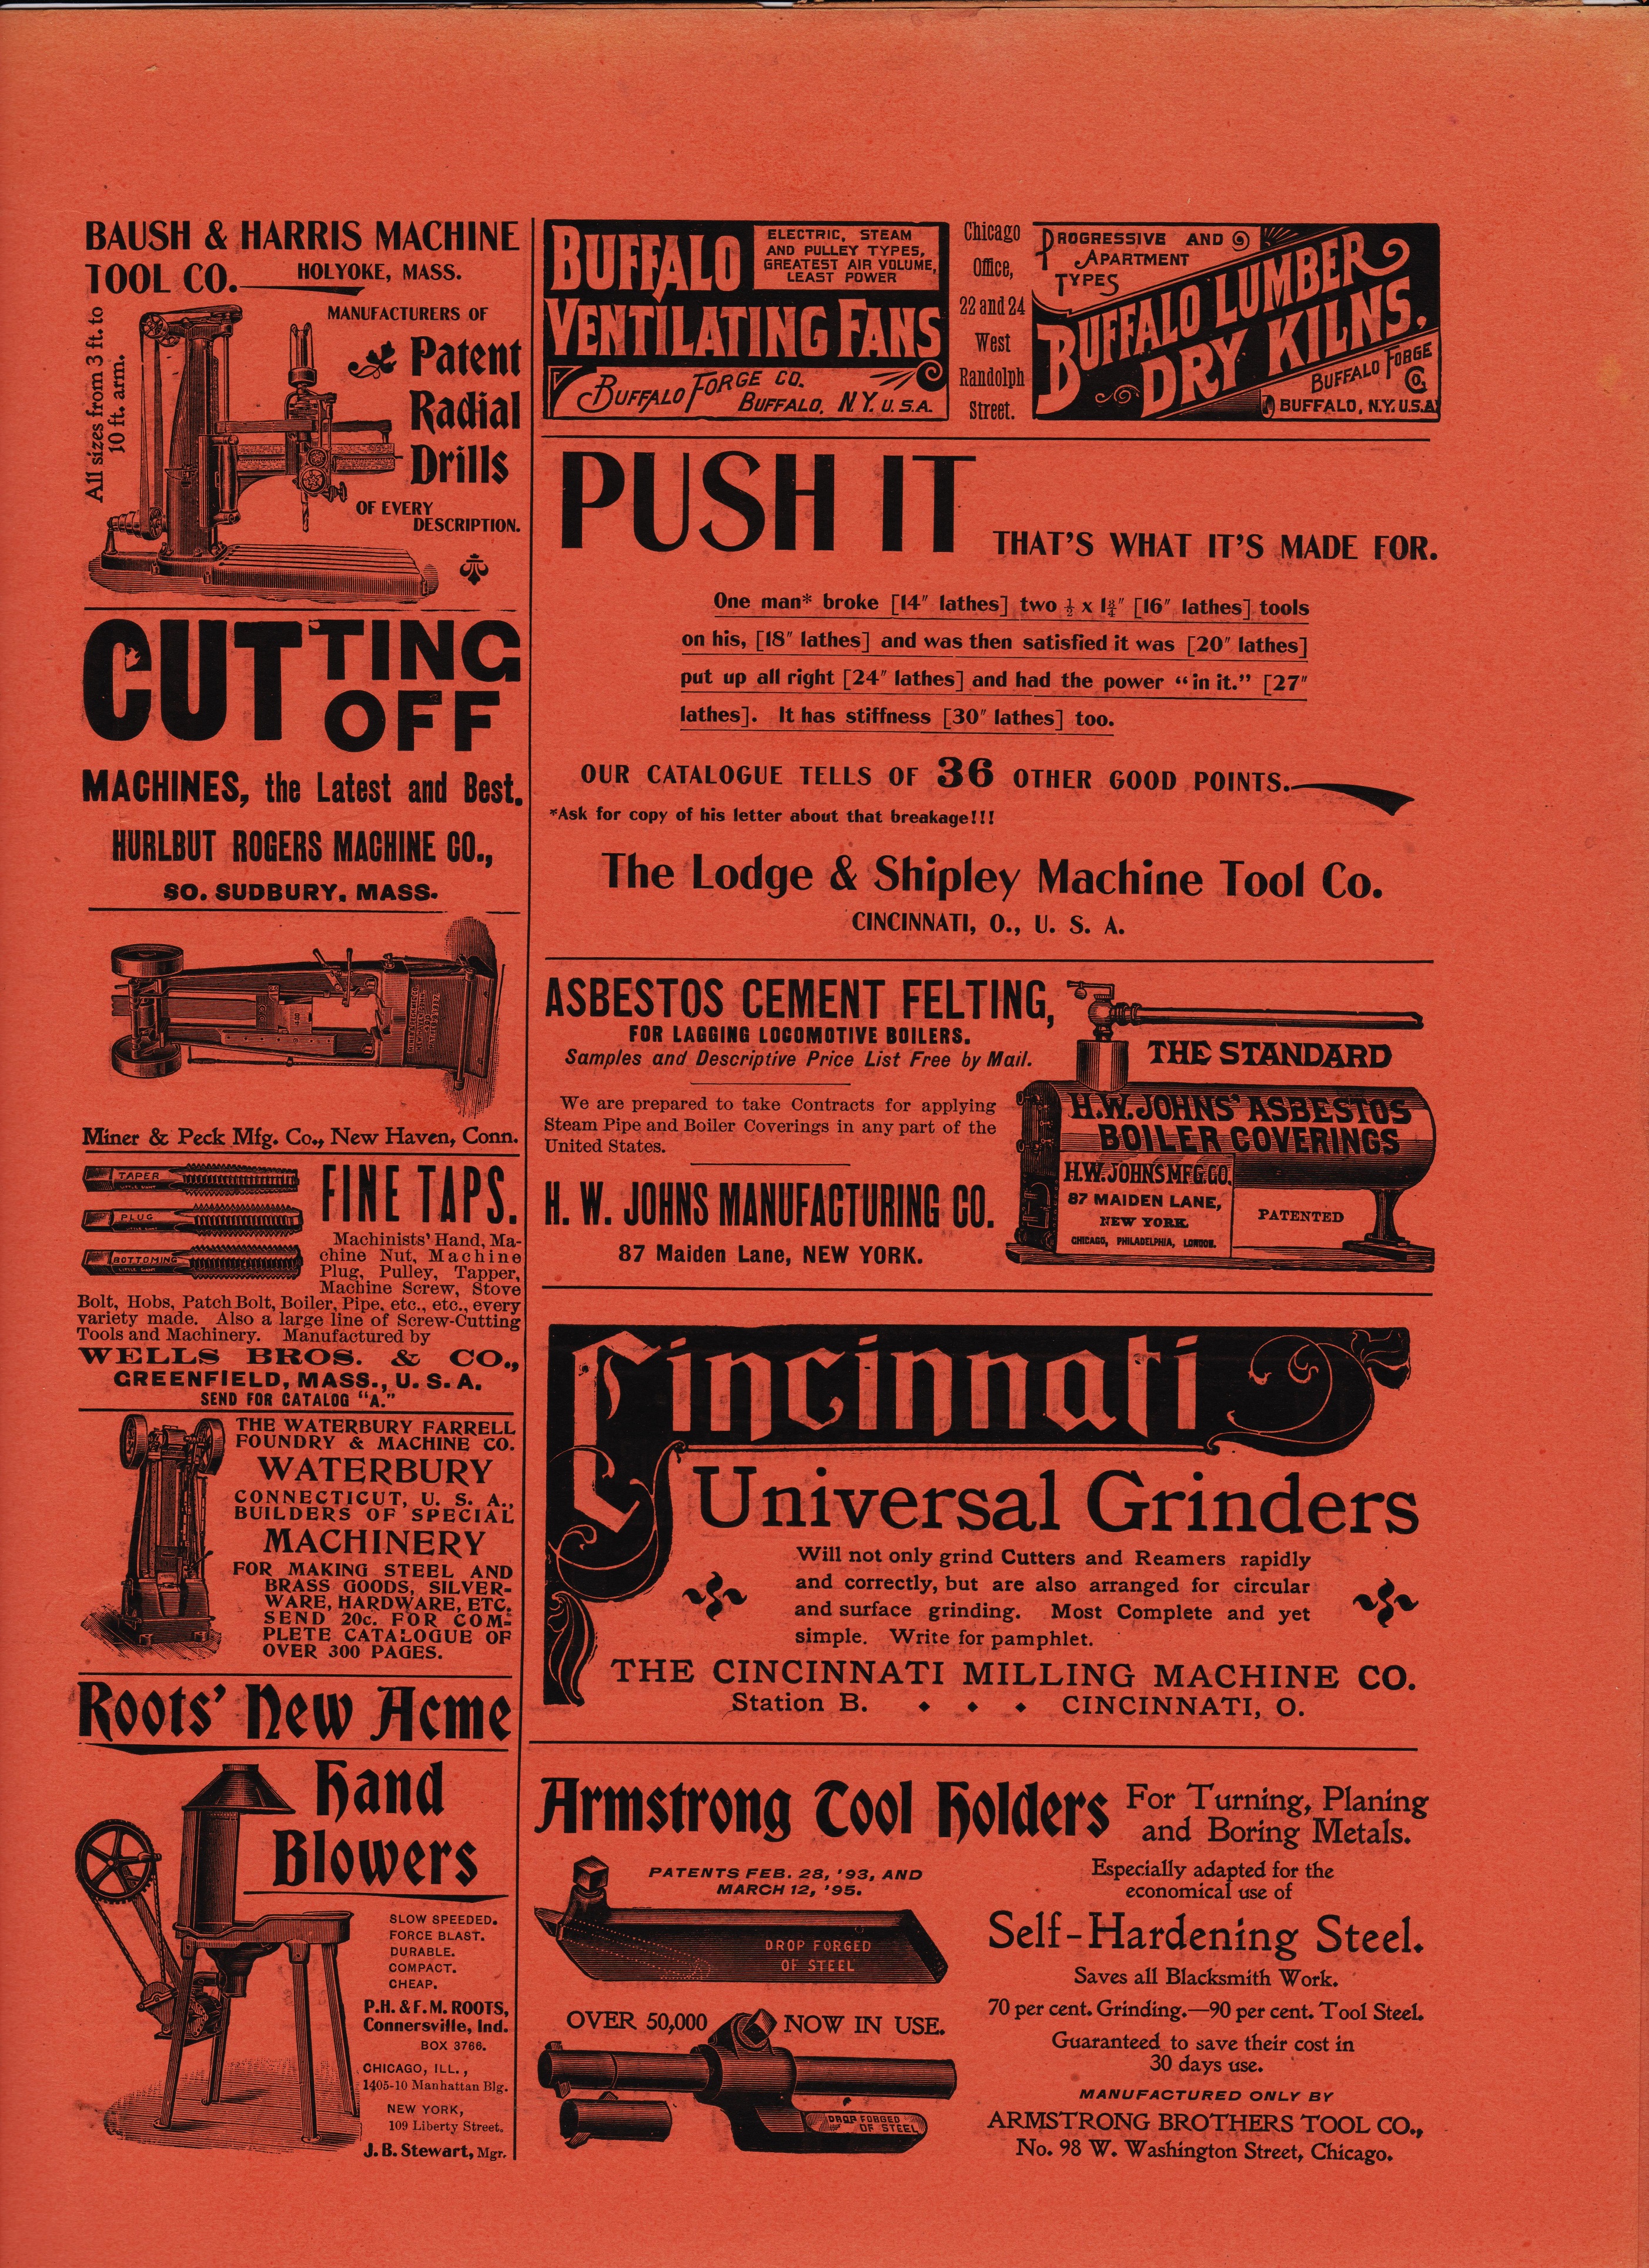 https://antiquemachinery.com/images-1896/American-Machinist-Feb-12-1887-May-1-pg-Cover-inside-back-Balsh-and-Haris-Radial-Drill-Drop-forge-hammer-Blacksmith-Forge-55per.jpg